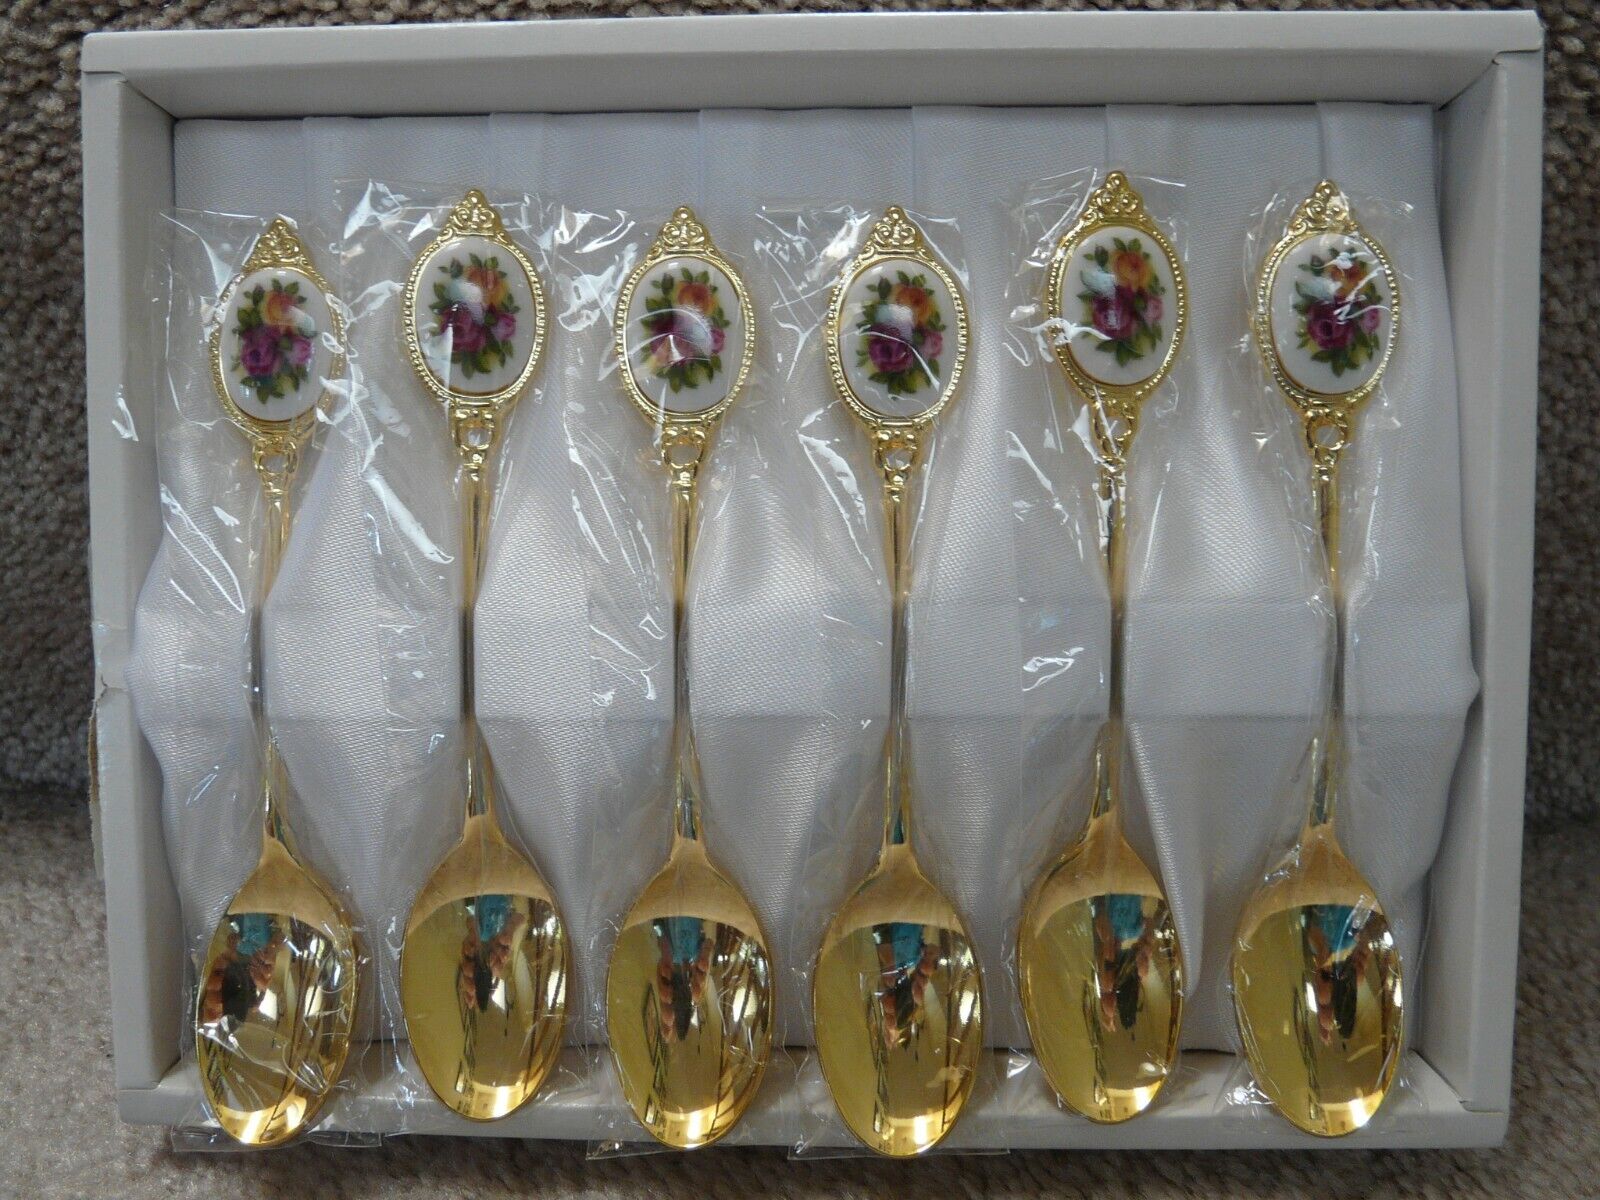 Vintage Royal Albert Old Country Roses Gold Plated Porcelain Insert Teaspoons